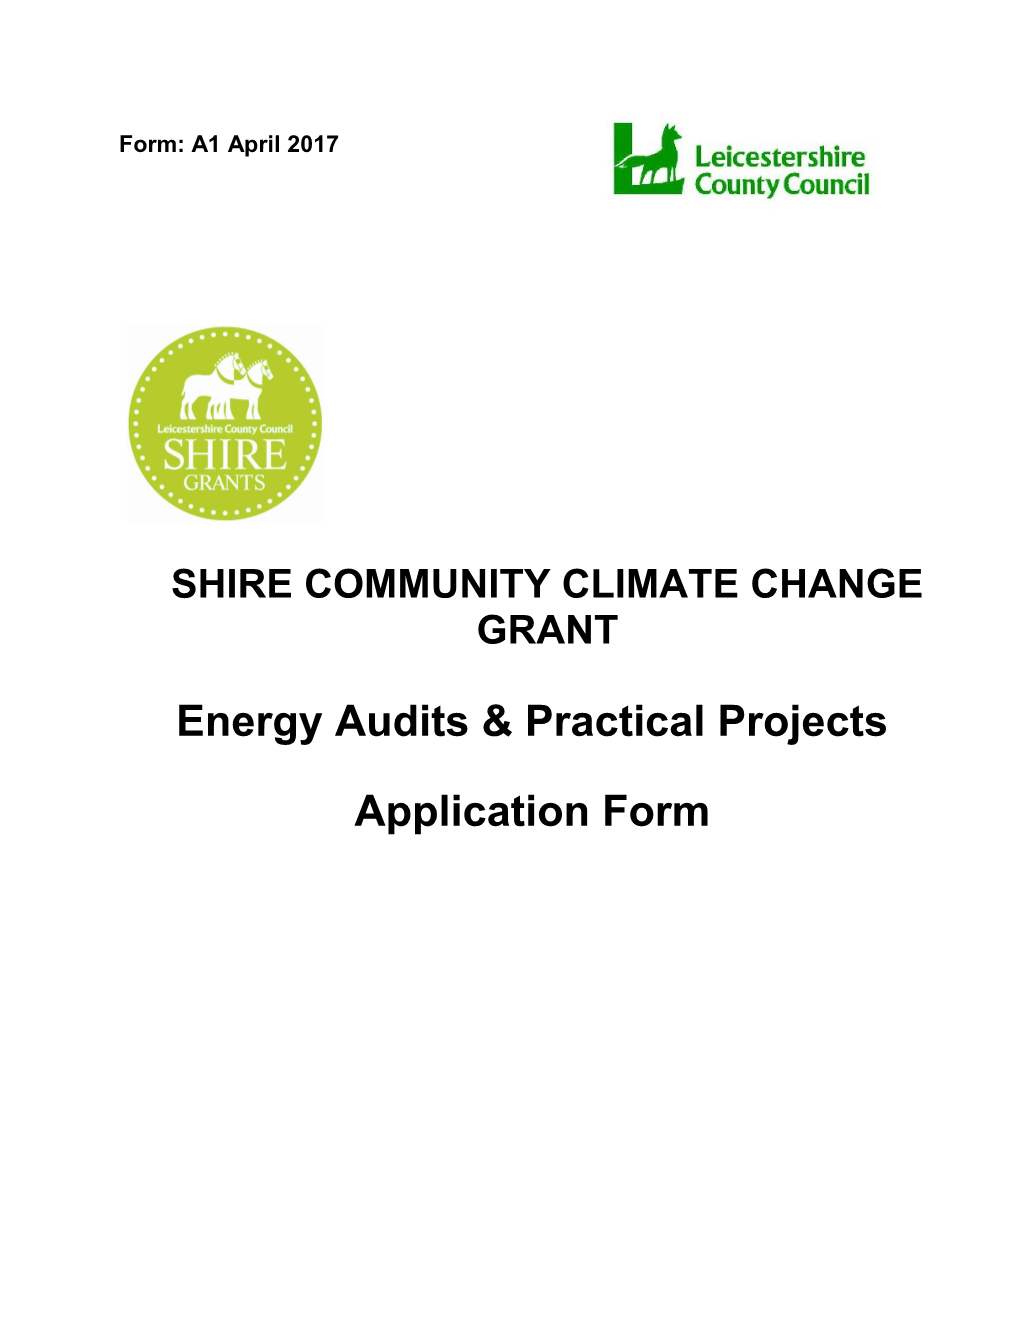 Shire Community Climate Change Grant Application Form - Energy Audits & Practical Projects